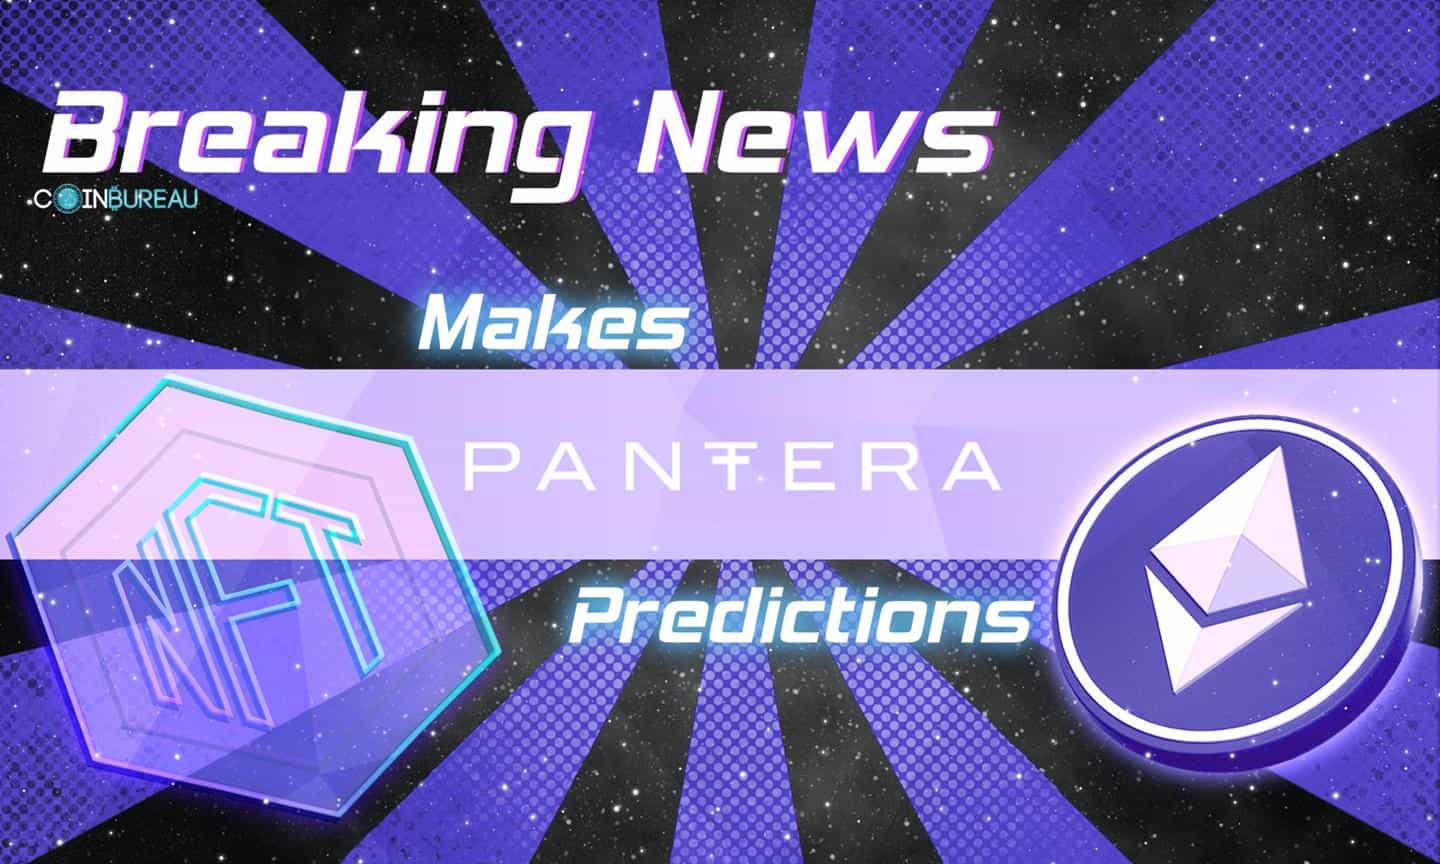 Pantera Capital Makes 2022 Predictions on NFTs, Layer 2s, and Ethereum Competitors